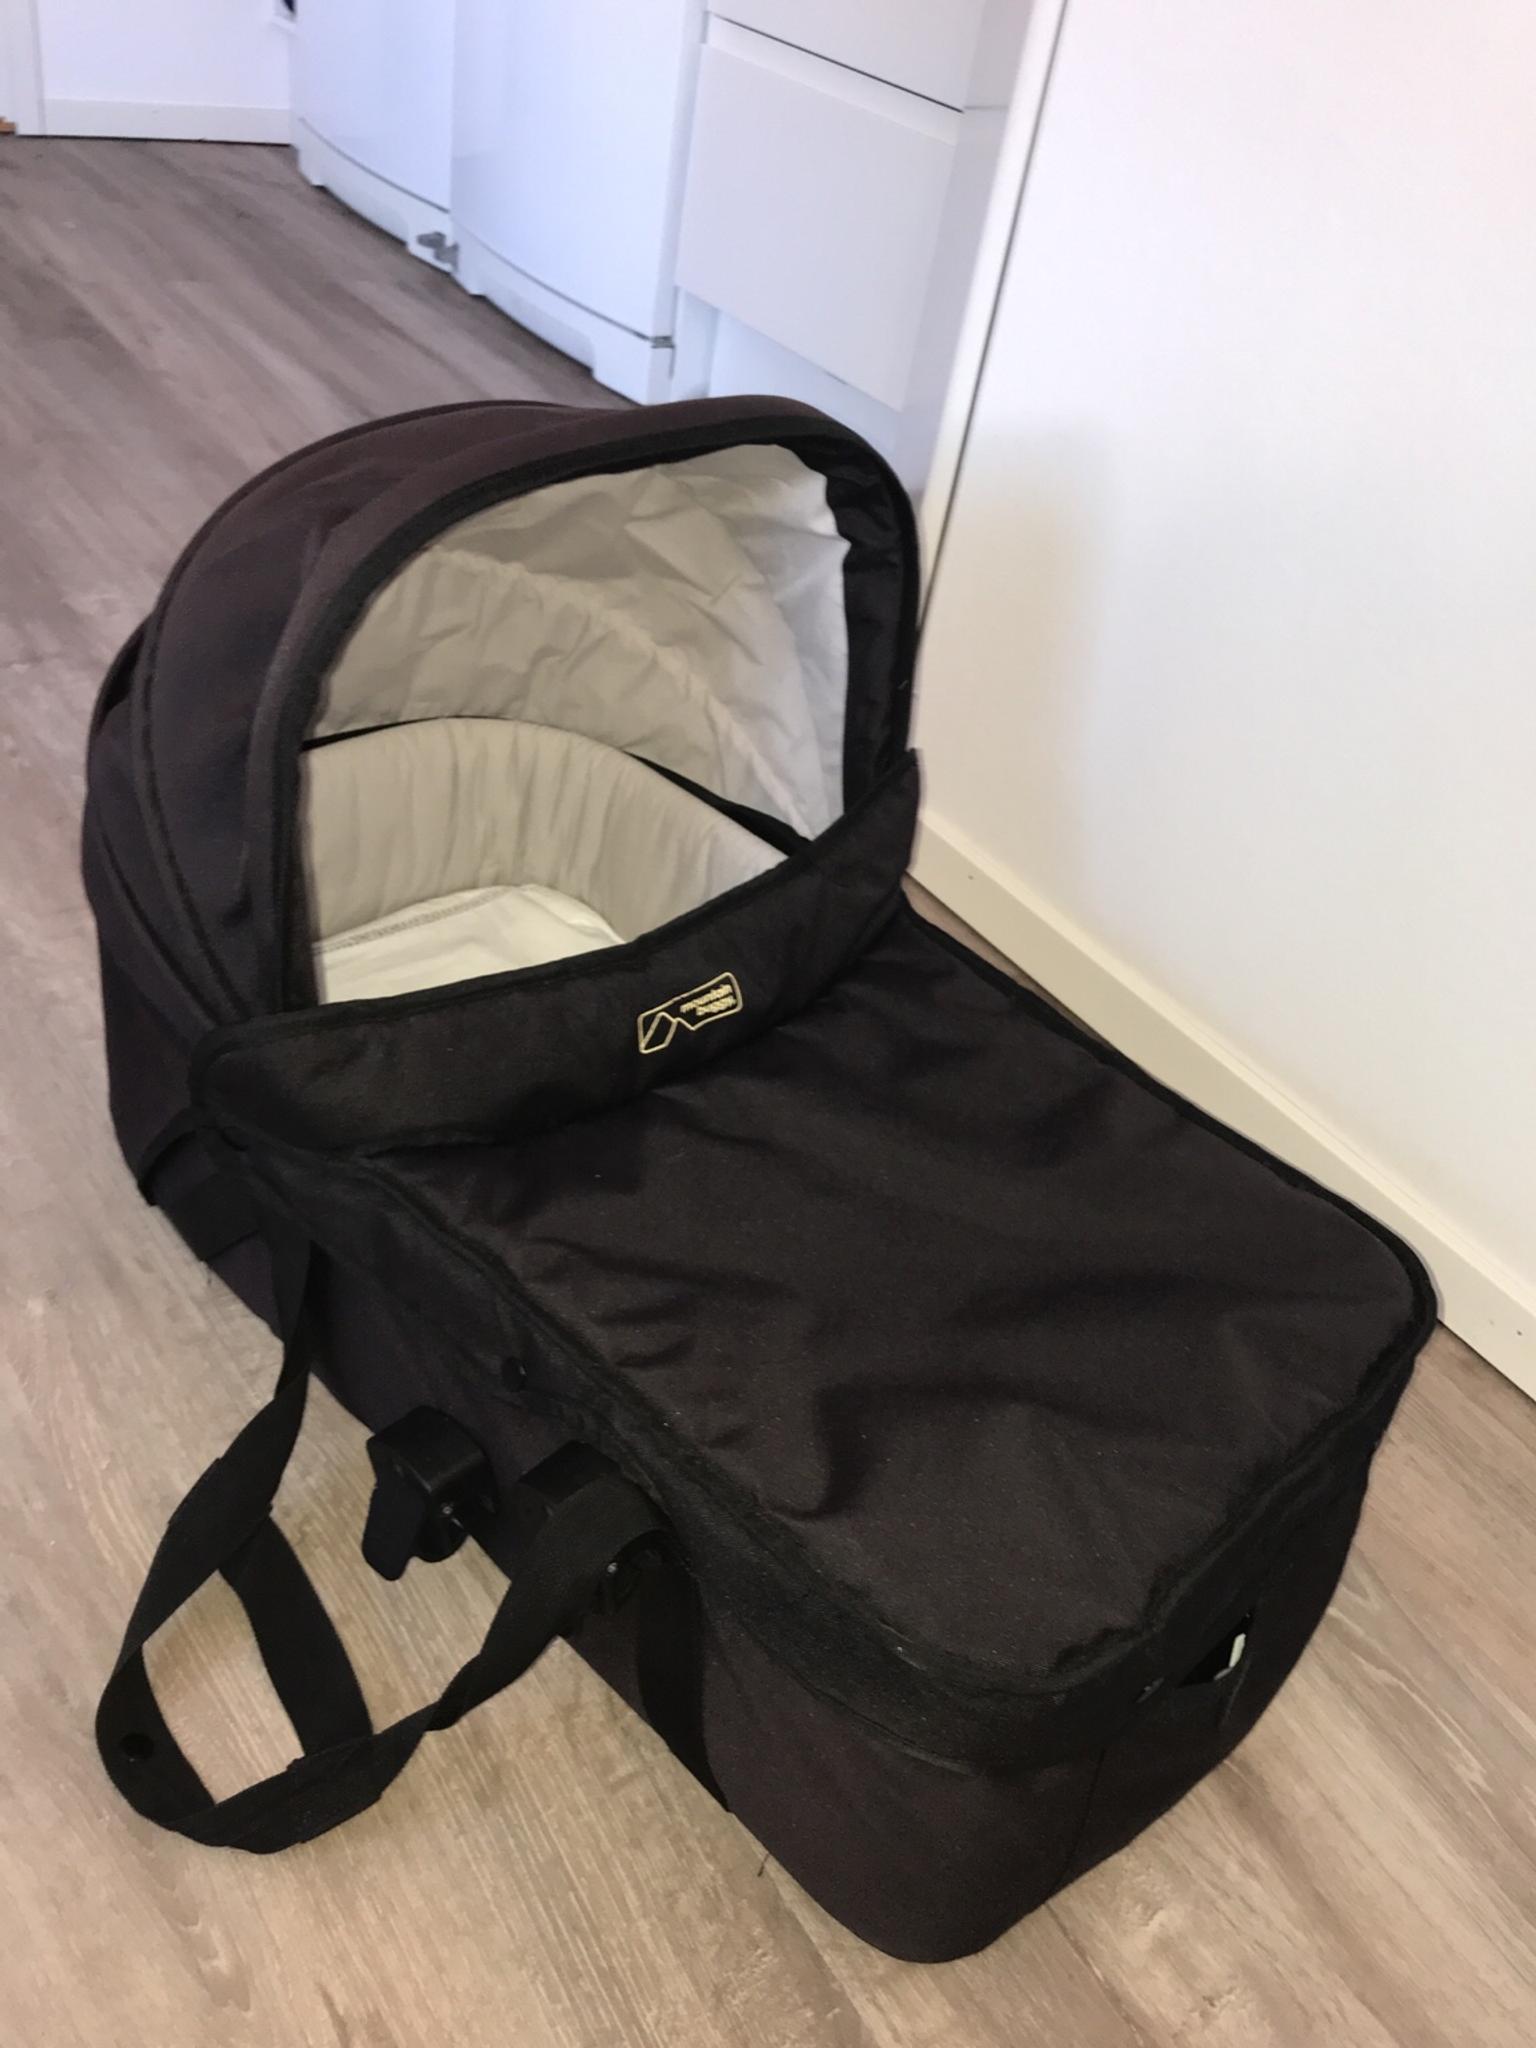 used pushchairs for sale